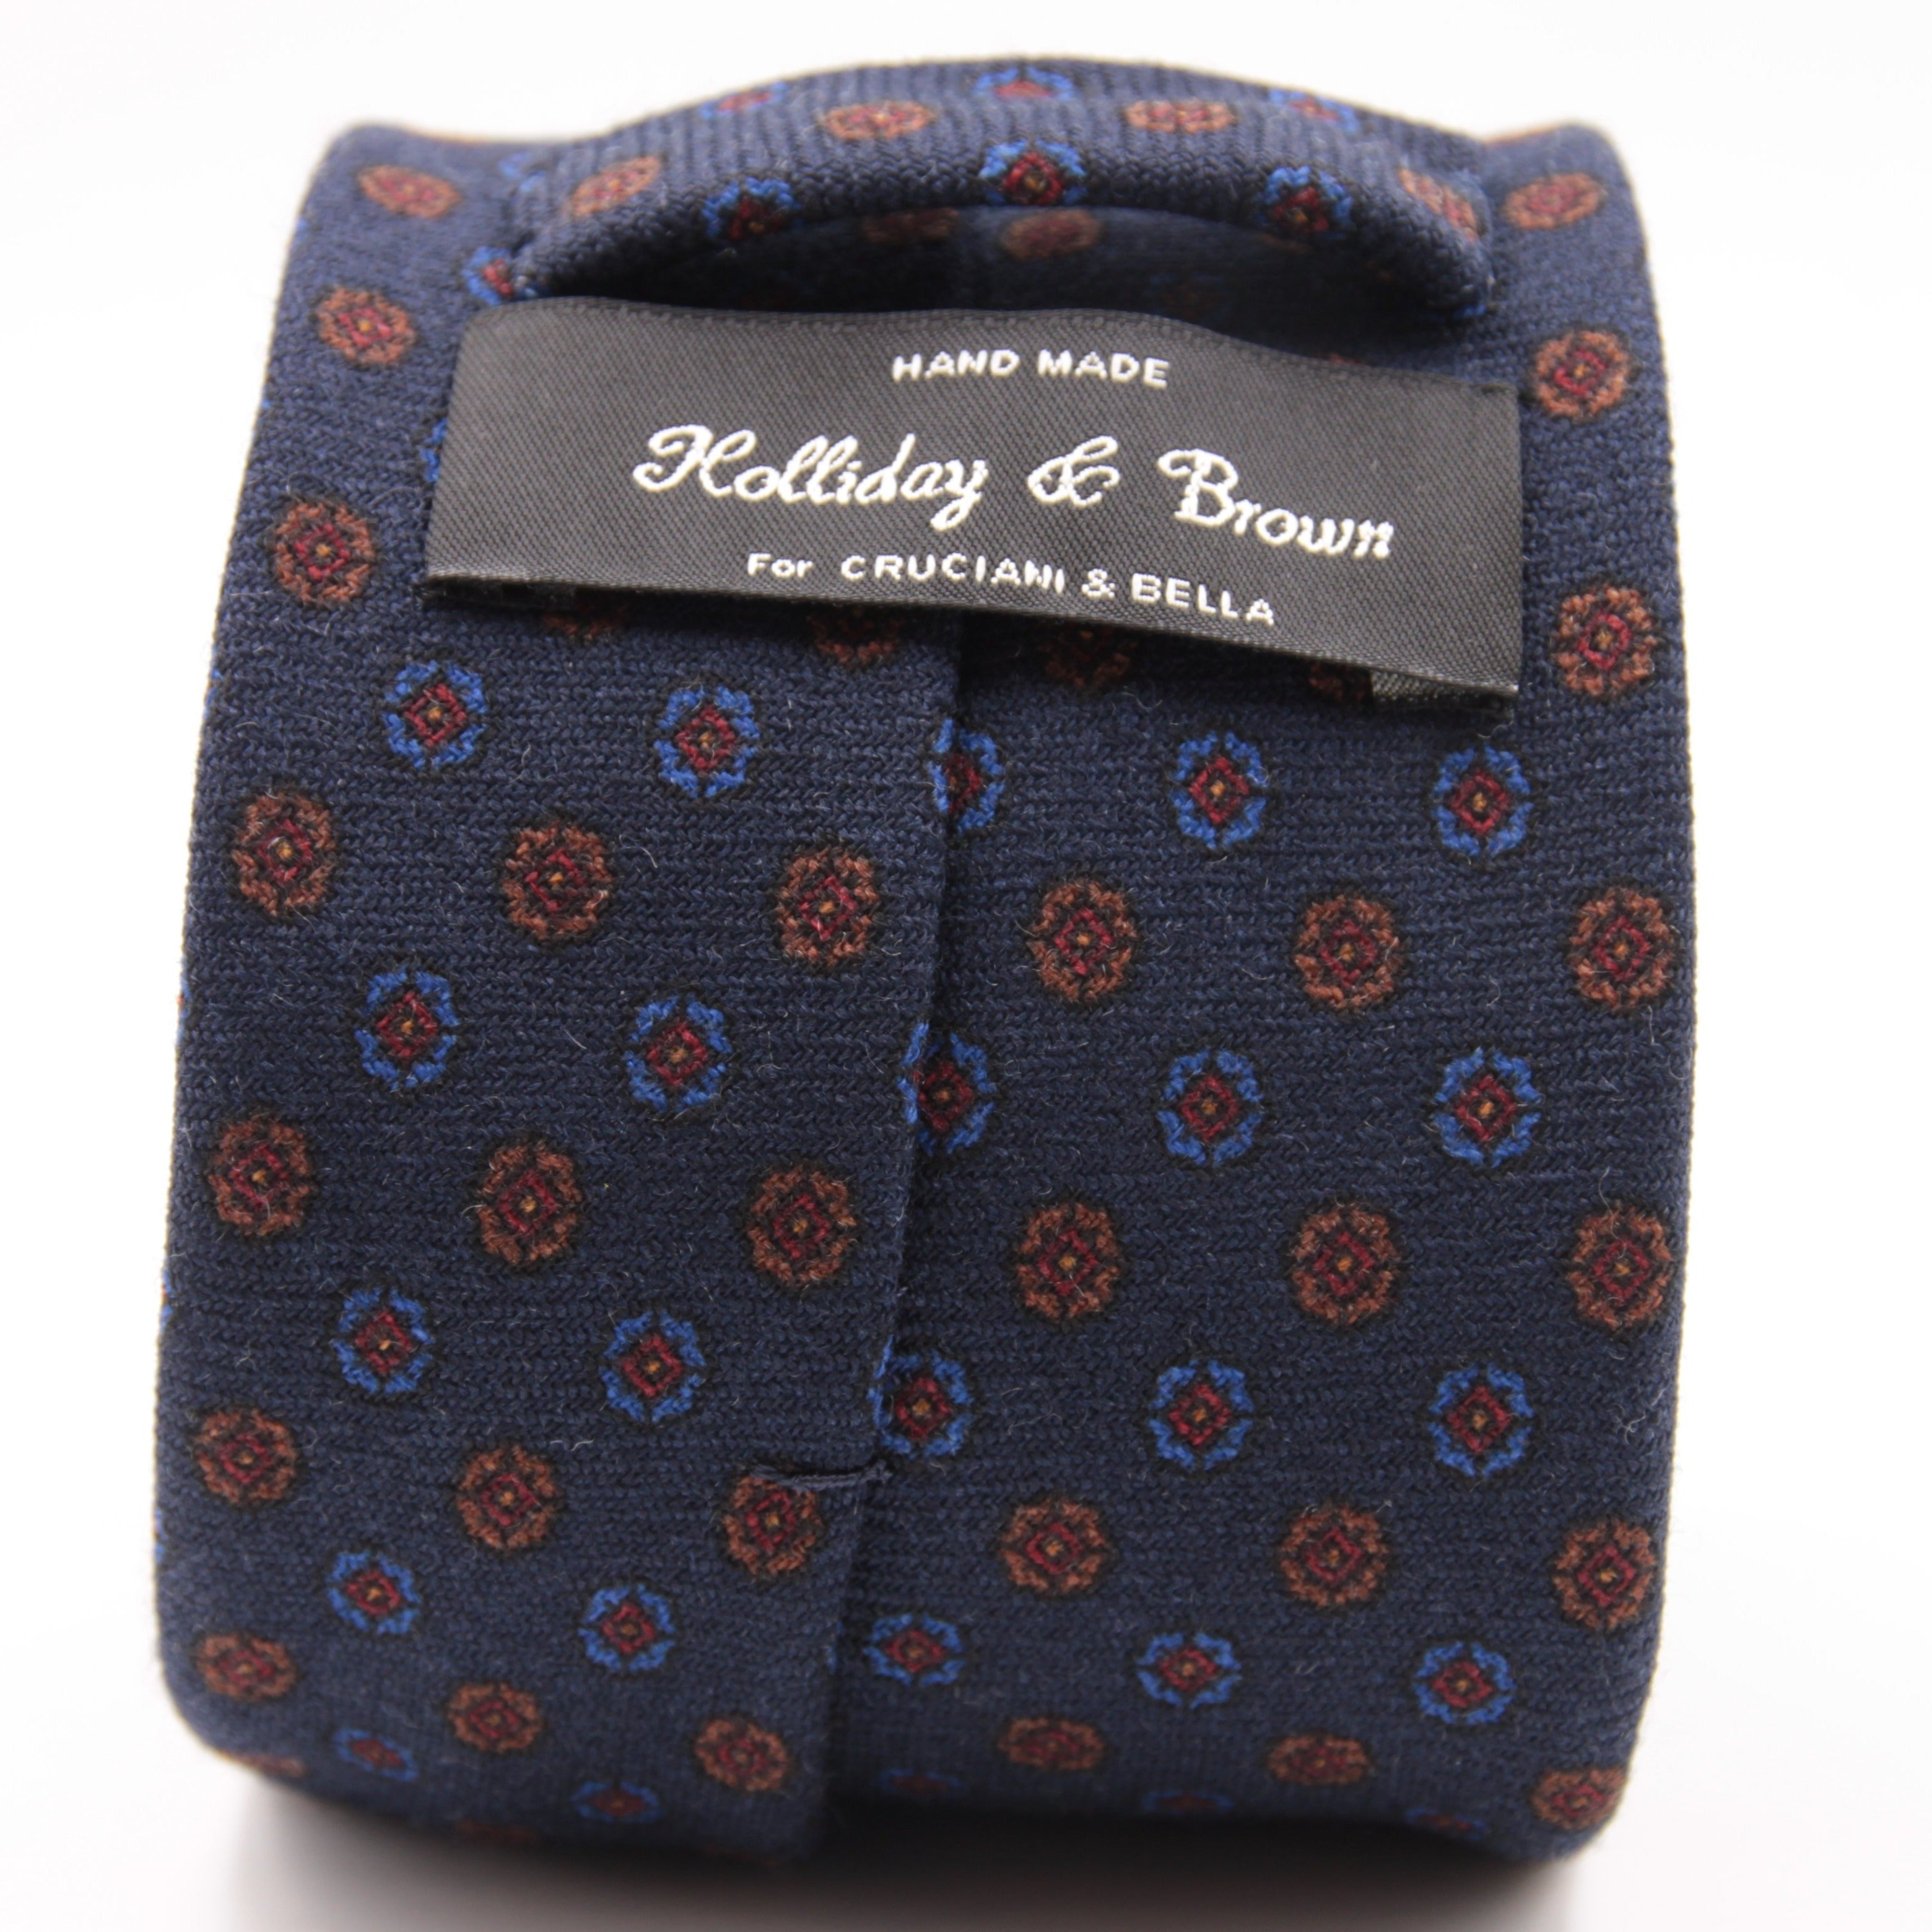 Holliday & Brown for Cruciani & Bella 100% Printed Wool  Tipped Blue, Brown and Wine Motif Tie Handmade in Italy 8 cm x 148 cm #5094